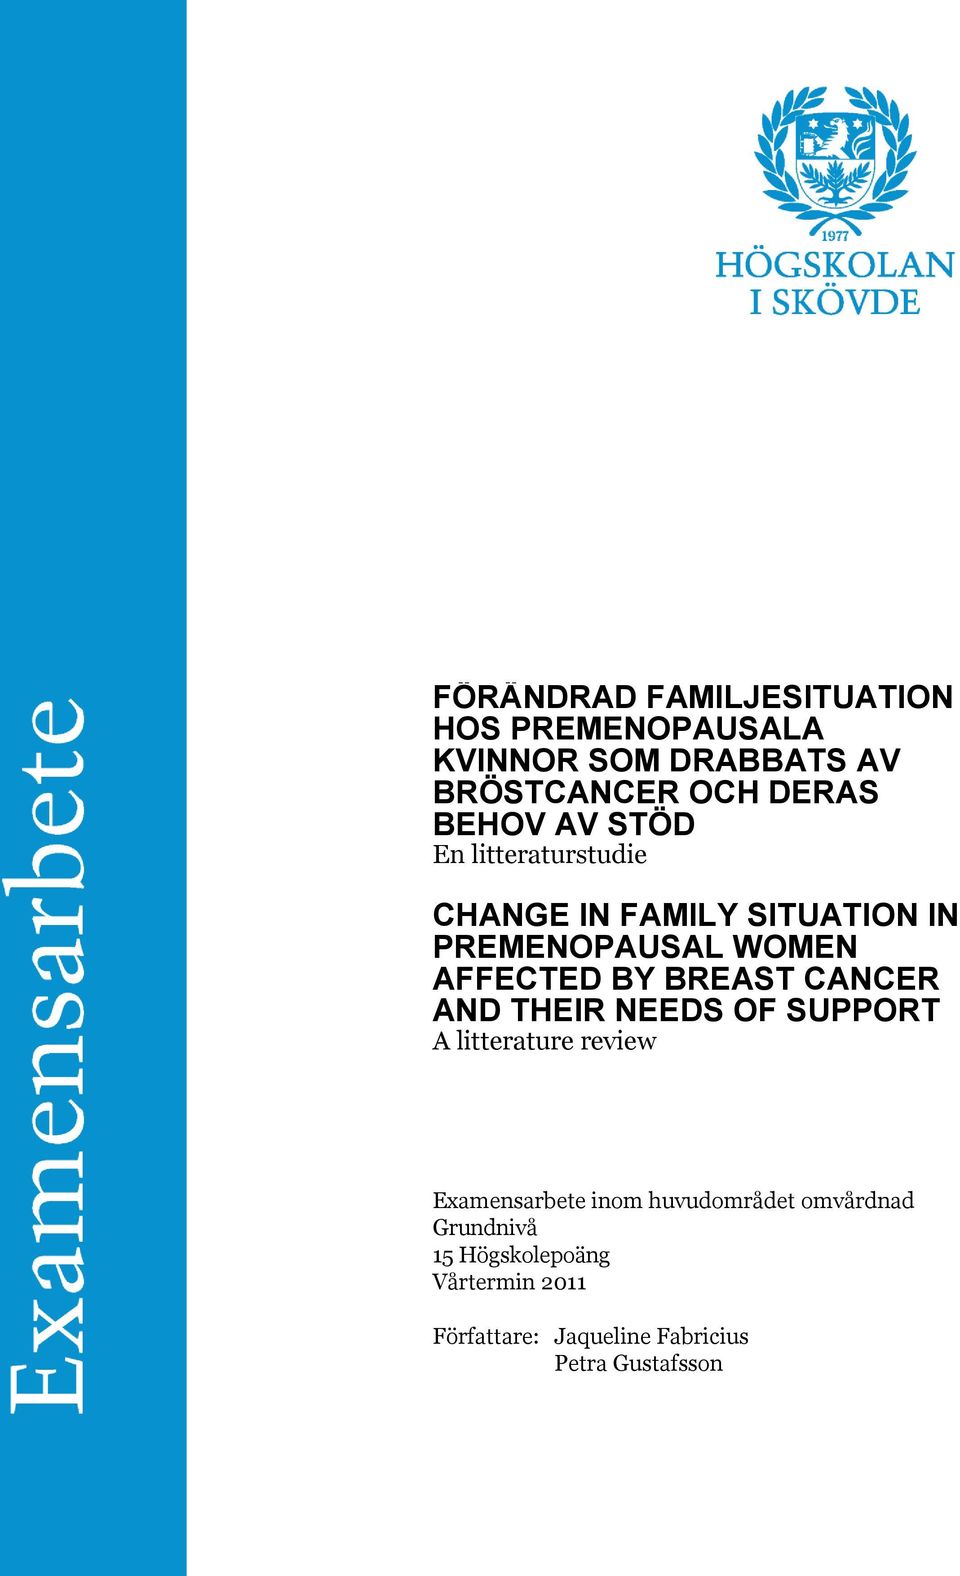 BREAST CANCER AND THEIR NEEDS OF SUPPORT A litterature review Examensarbete inom huvudområdet